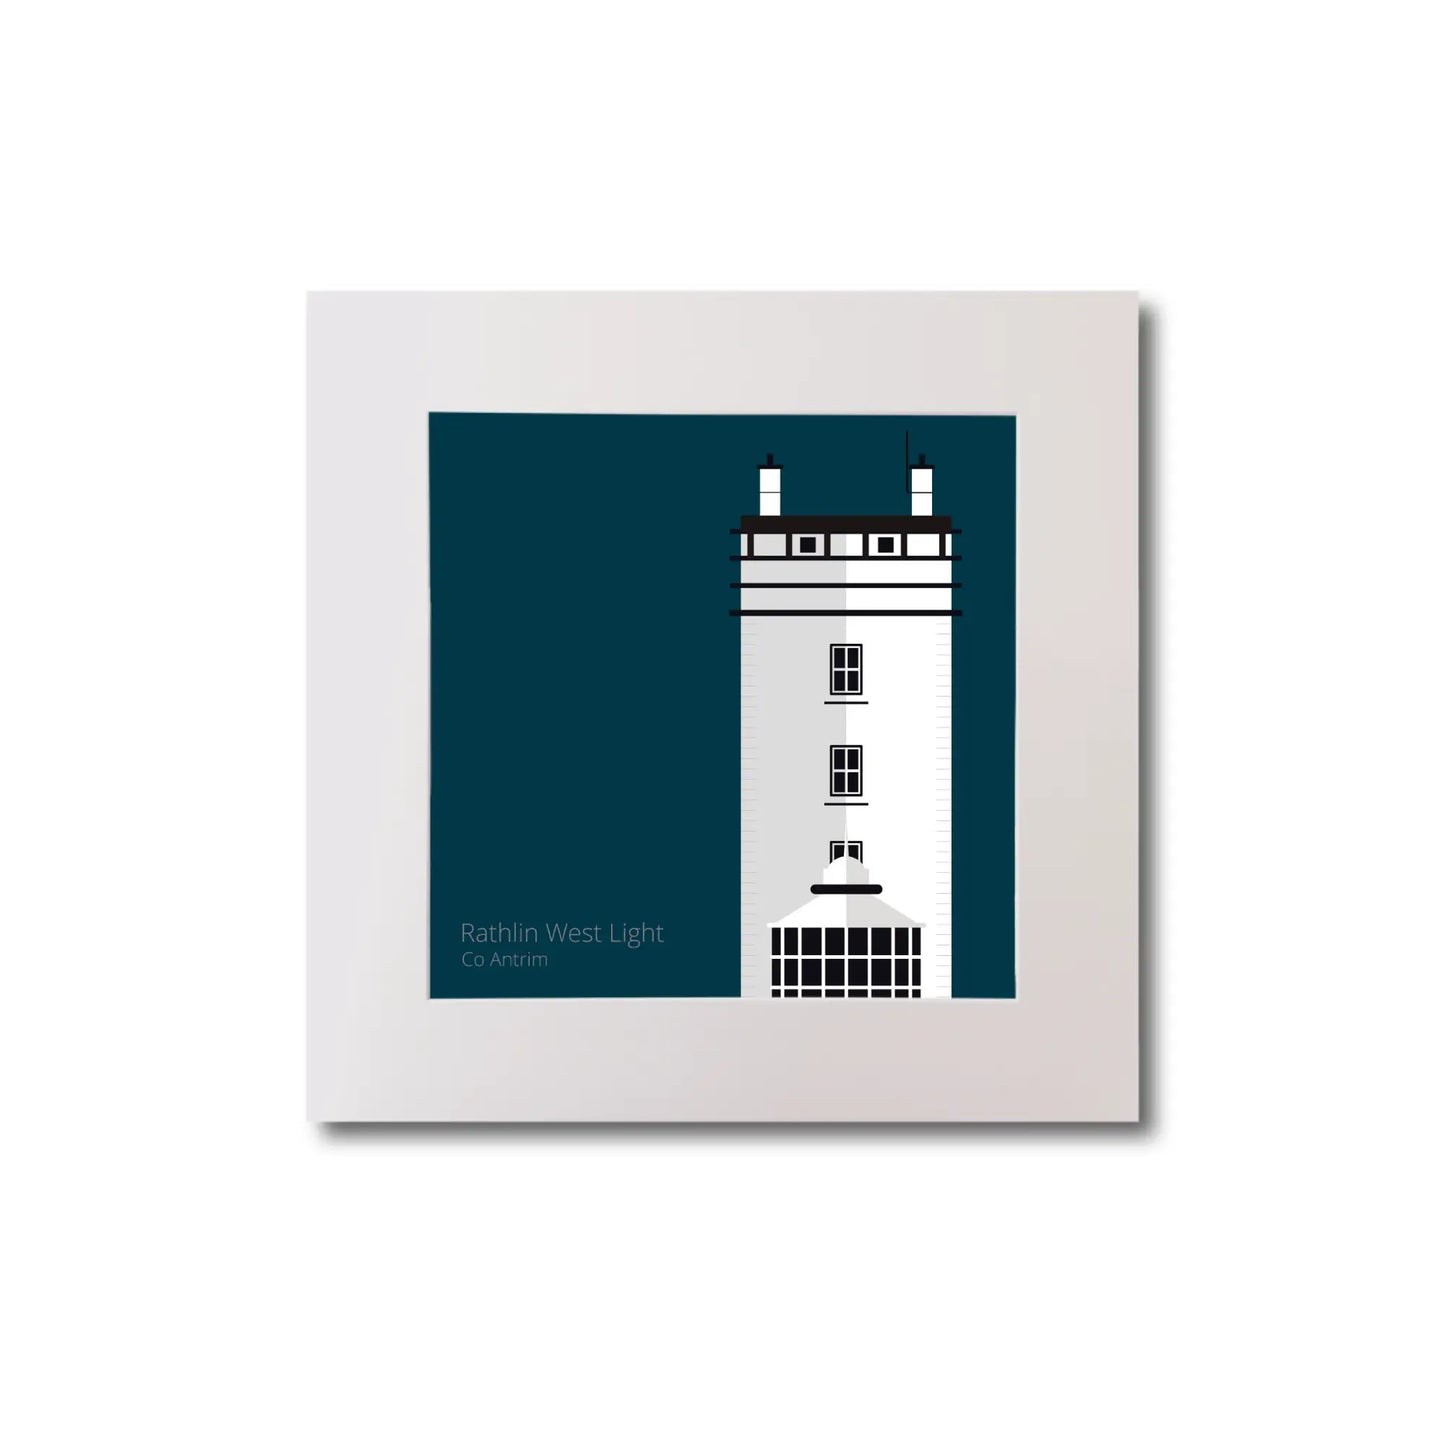 Illustration of Rathlin West lighthouse on a midnight blue background, mounted and measuring 20x20cm.